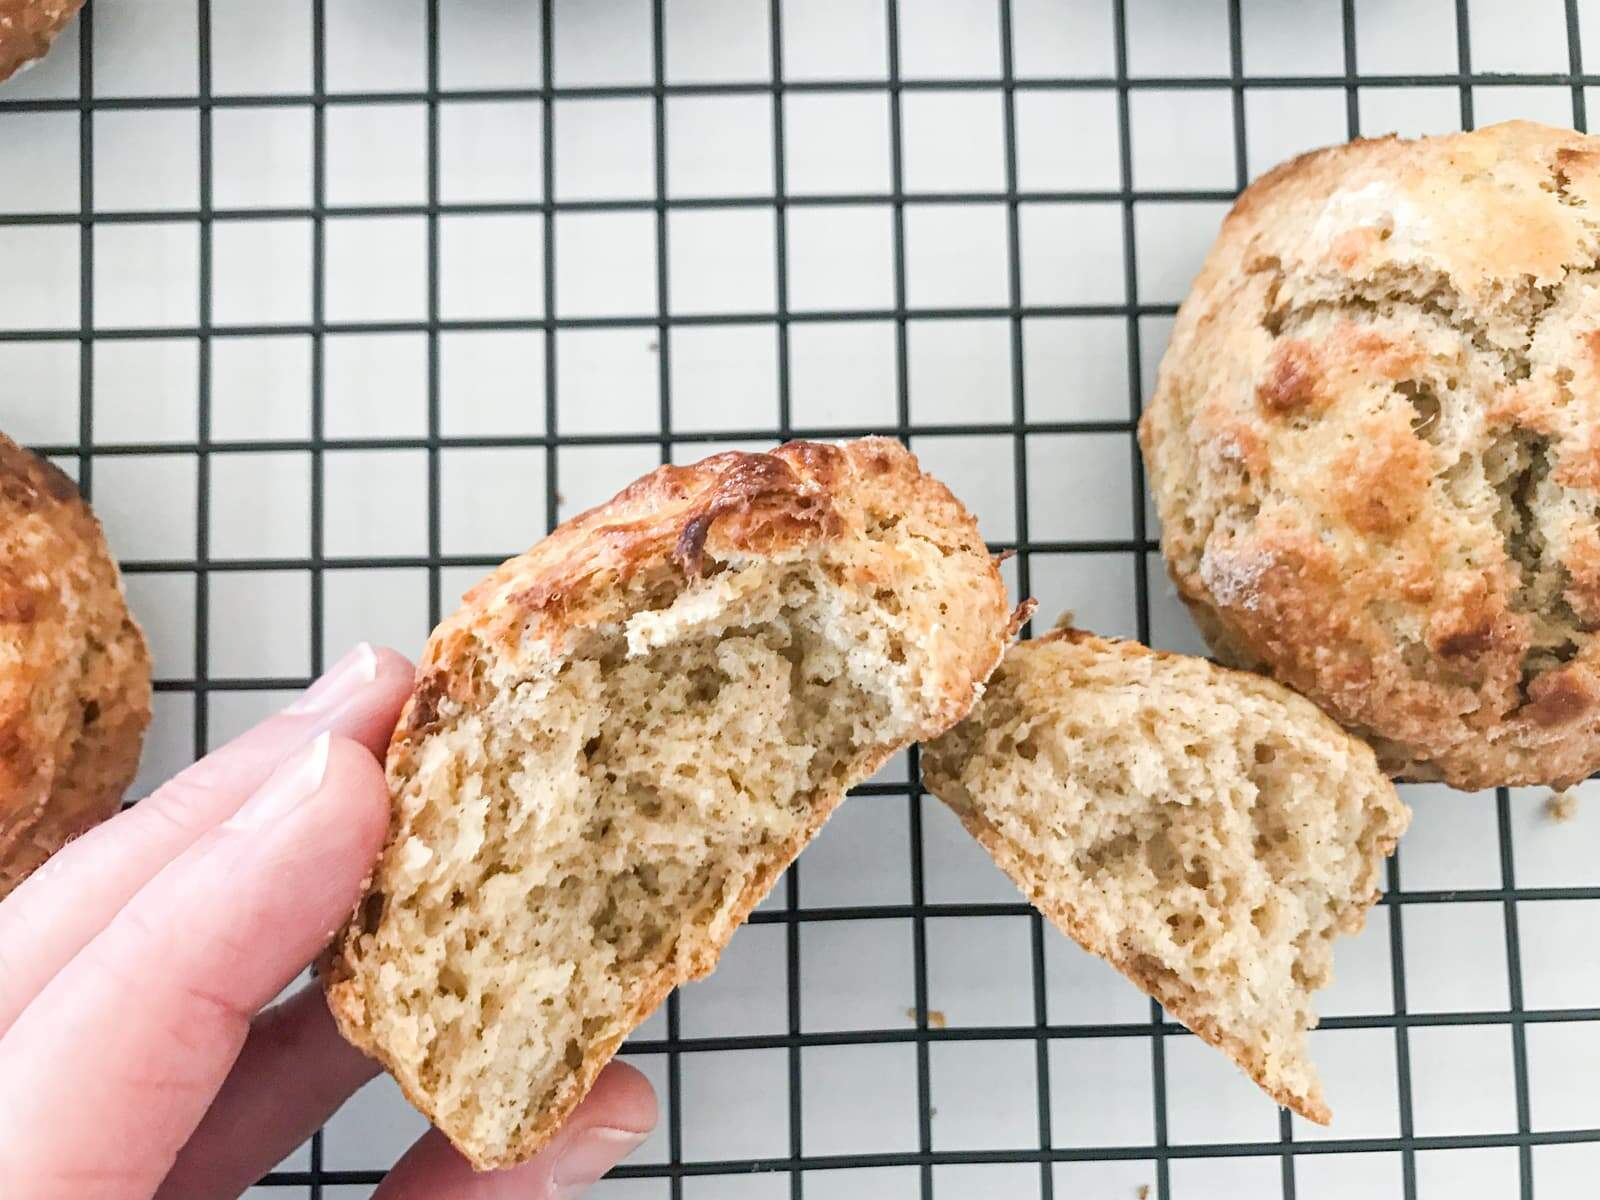 A cooling rack with scones from the oven and a hand opening one to show the texture inside the scone.